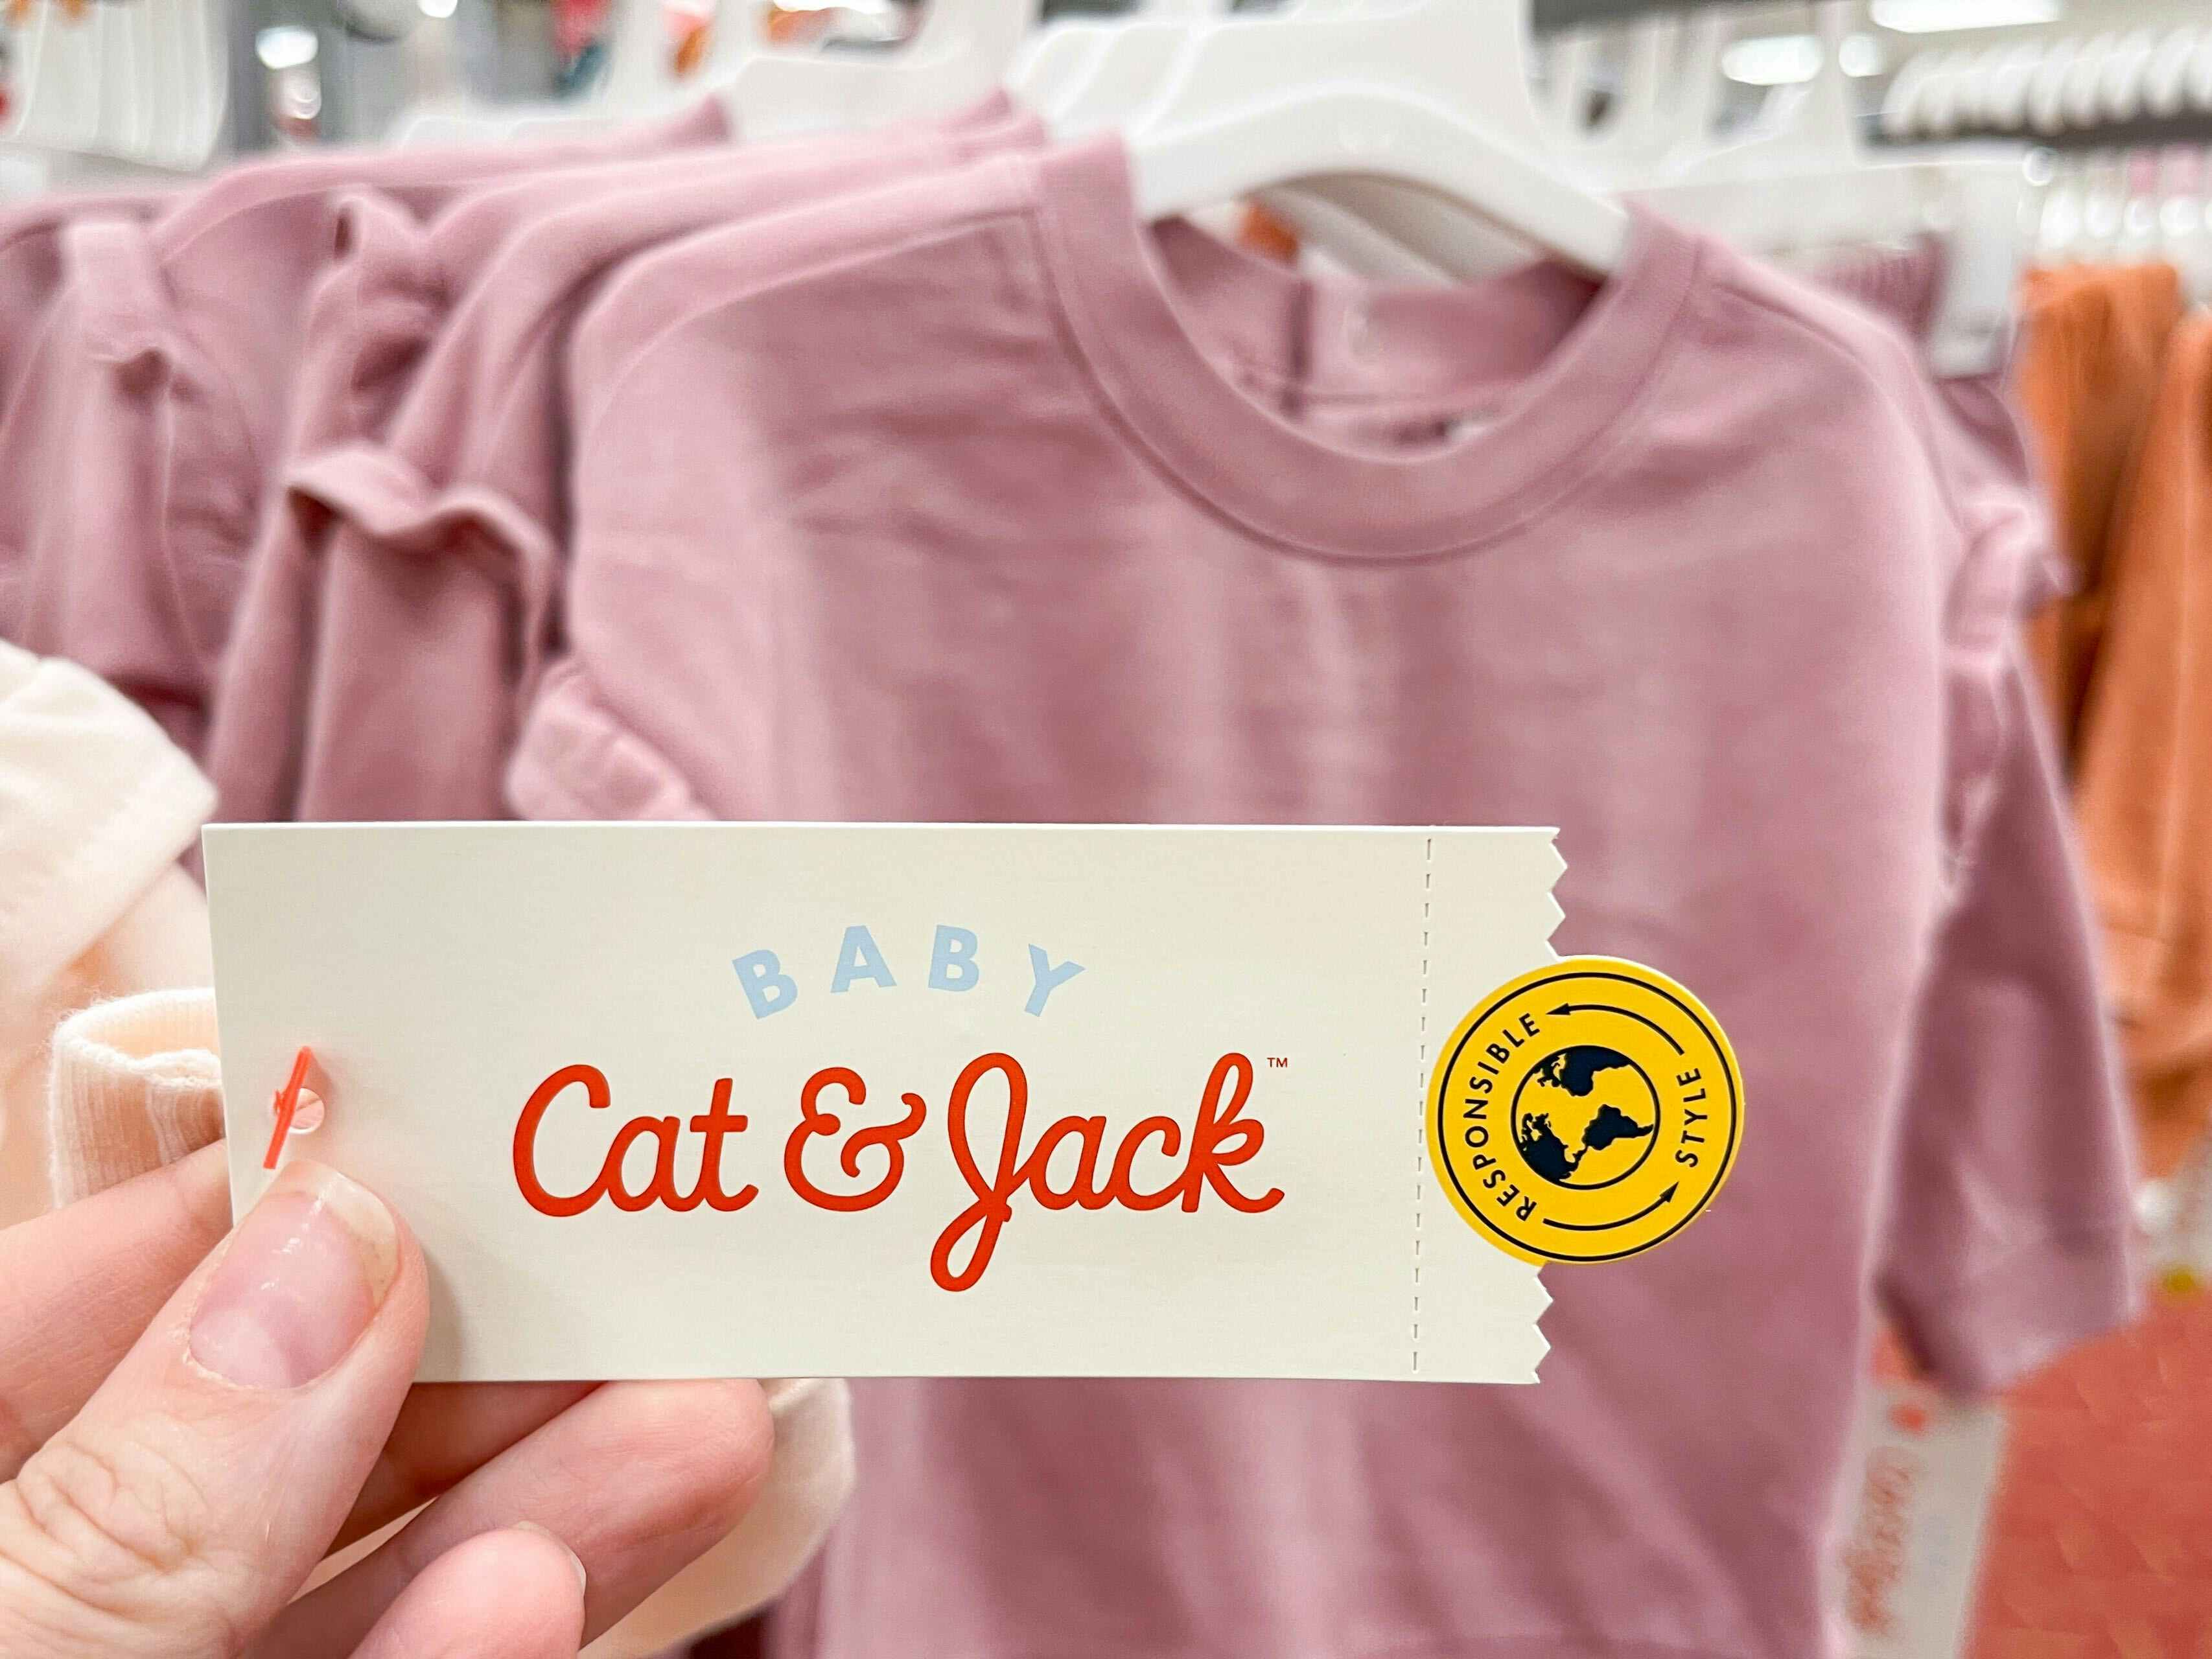 A Baby Cat & Jack tag held out by hand with infant clothes hanging in the back ground.